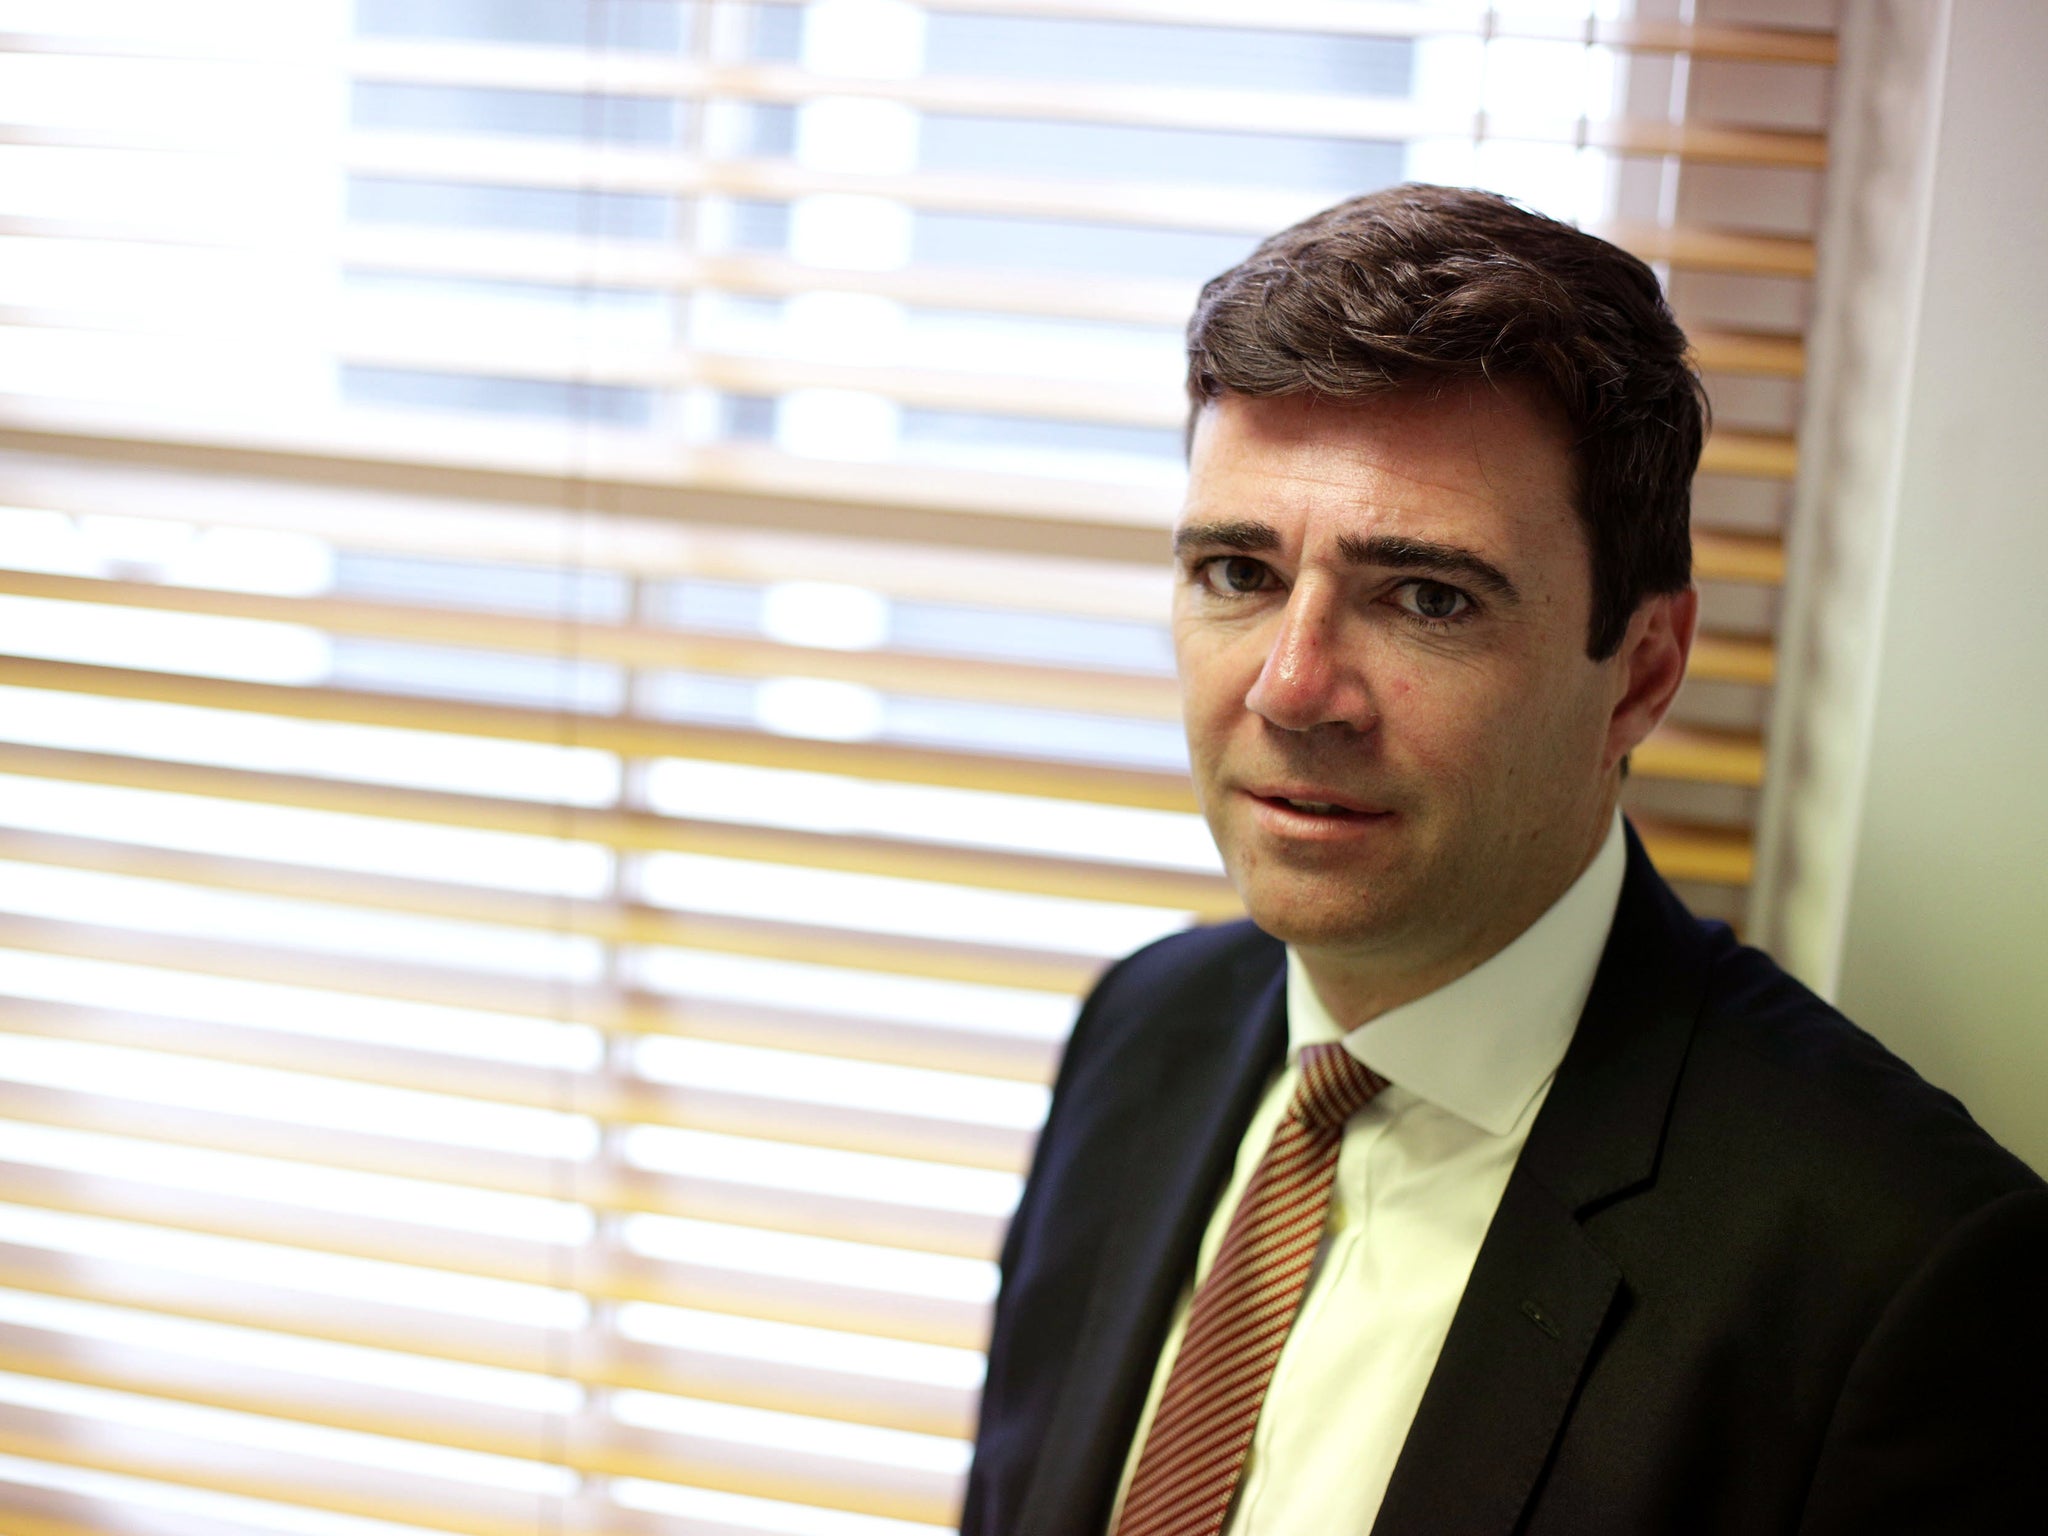 Andy Burnham started out as the front-runner in the leadership election, seen as the candidate of the left until Jeremy Corbyn entered the race.